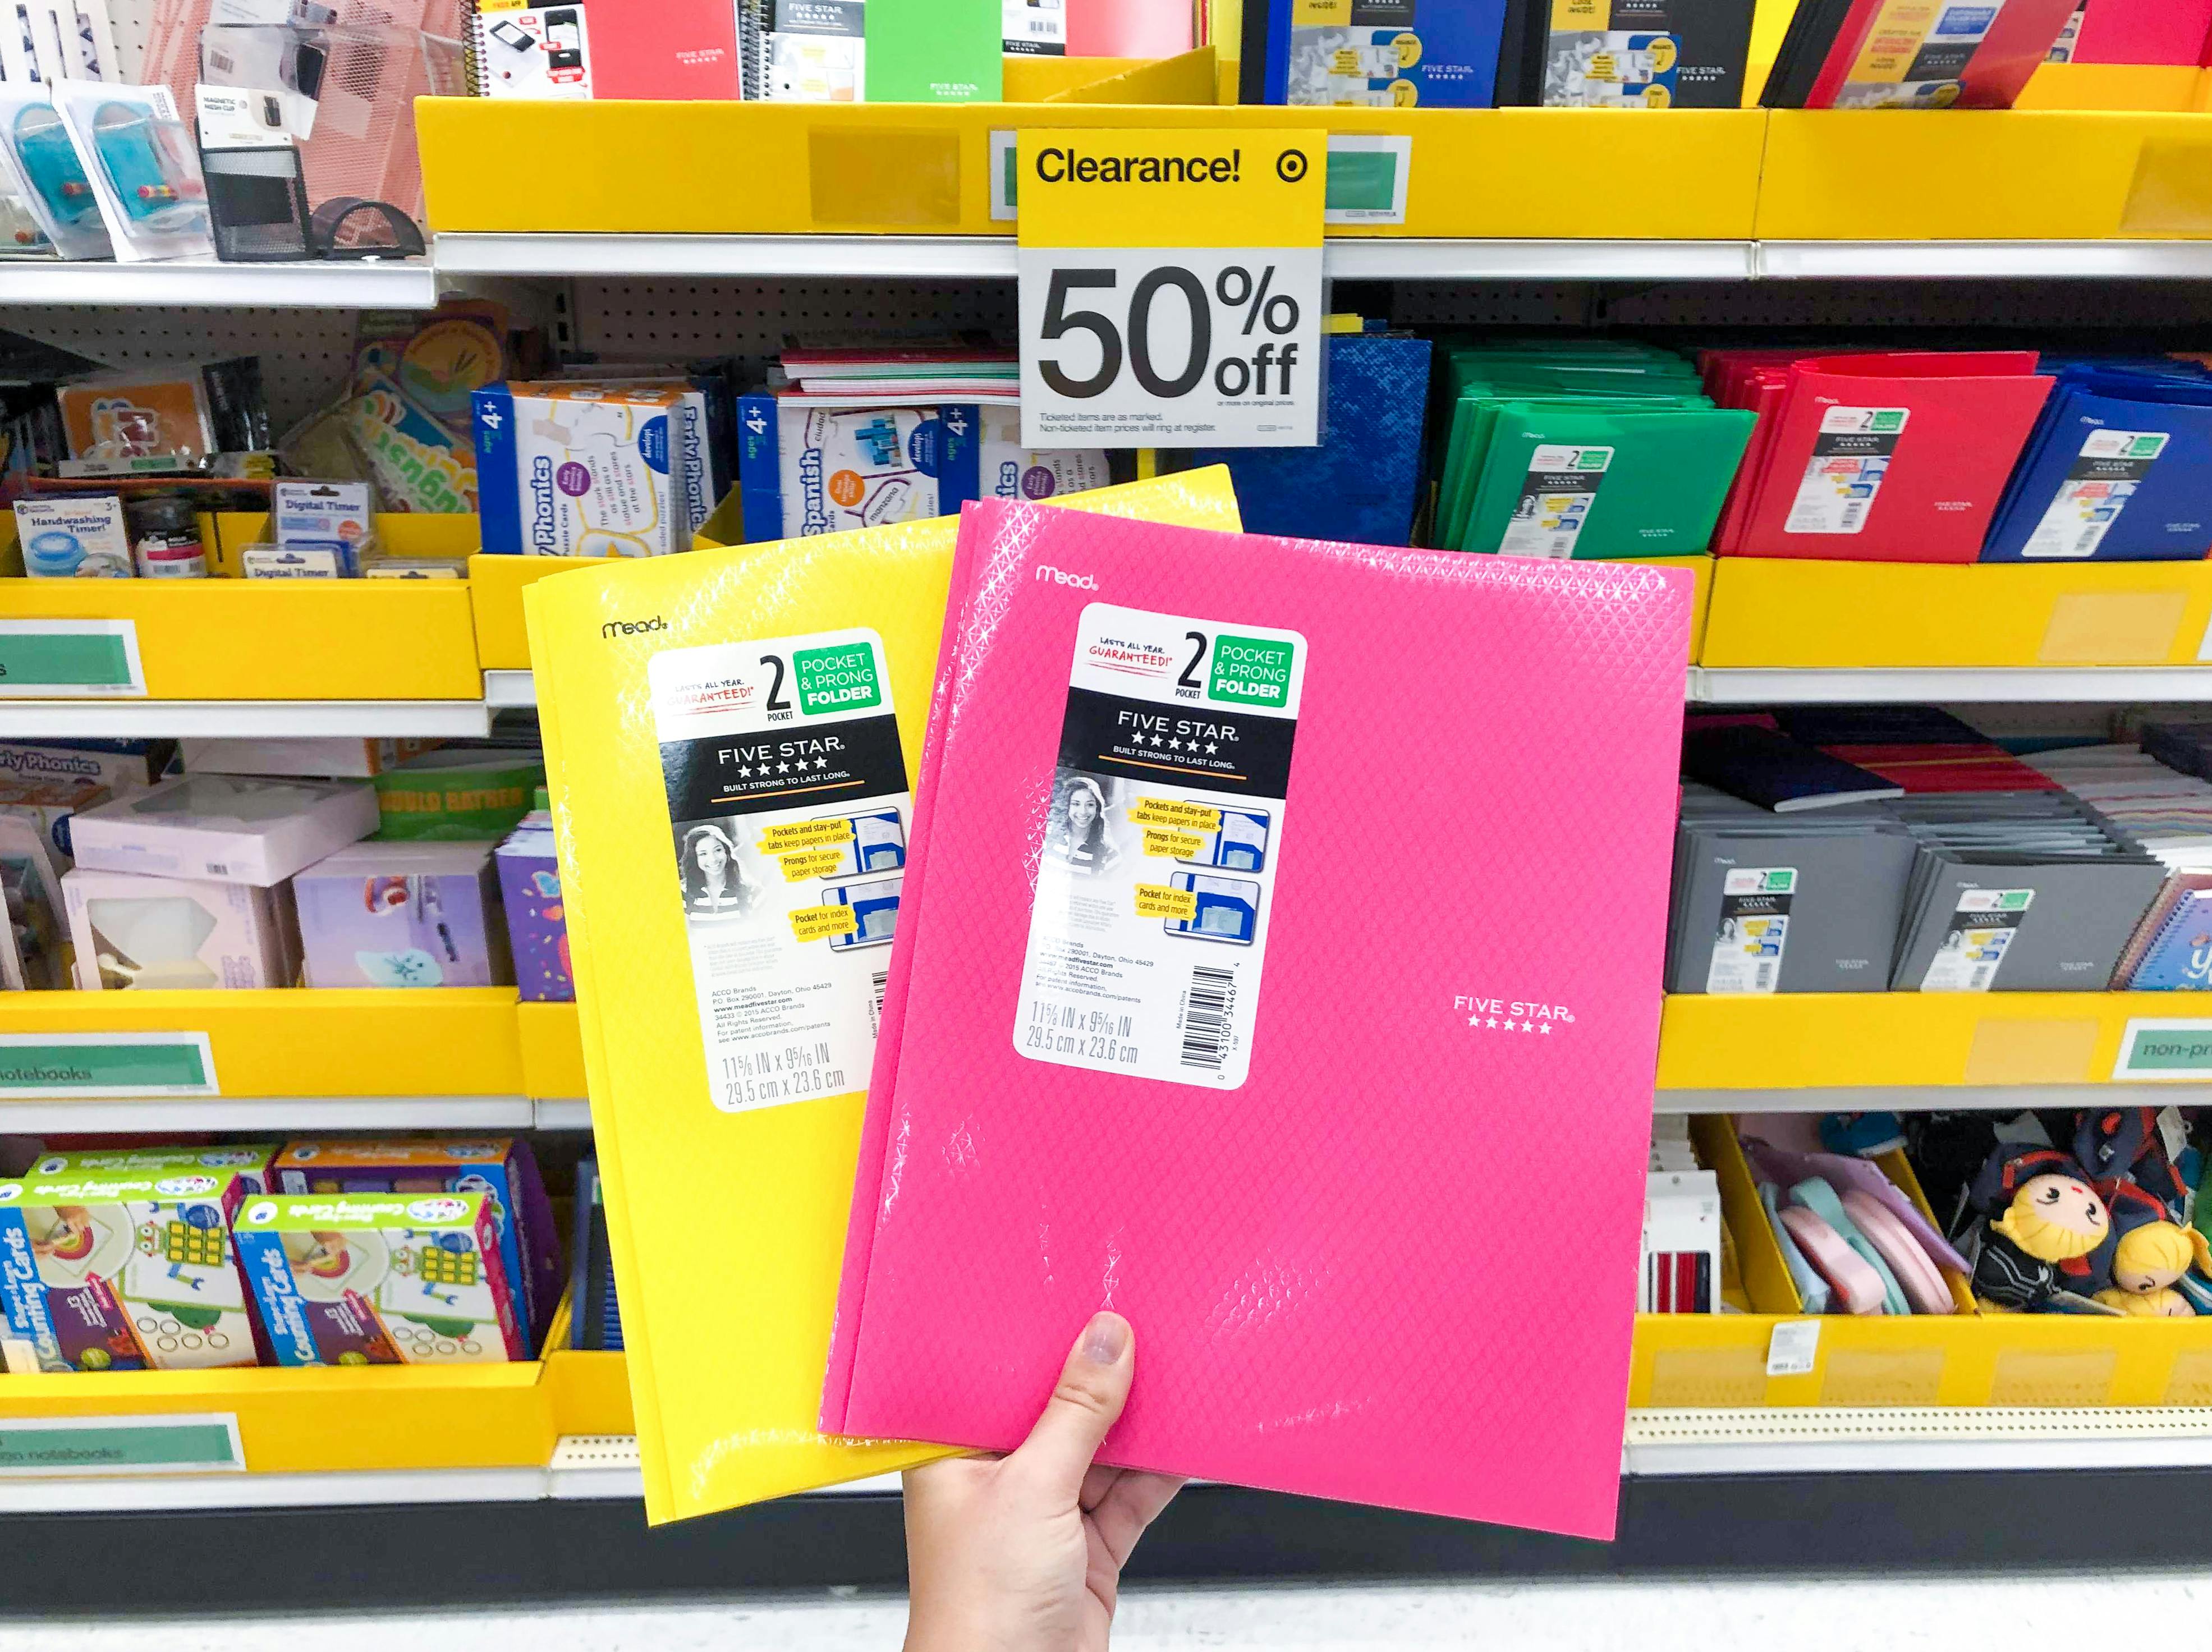 A person holding two folders in front of the back to school clearance section at Target. A sign that says "Clearance 50% off" is attached to the shelf in the background.